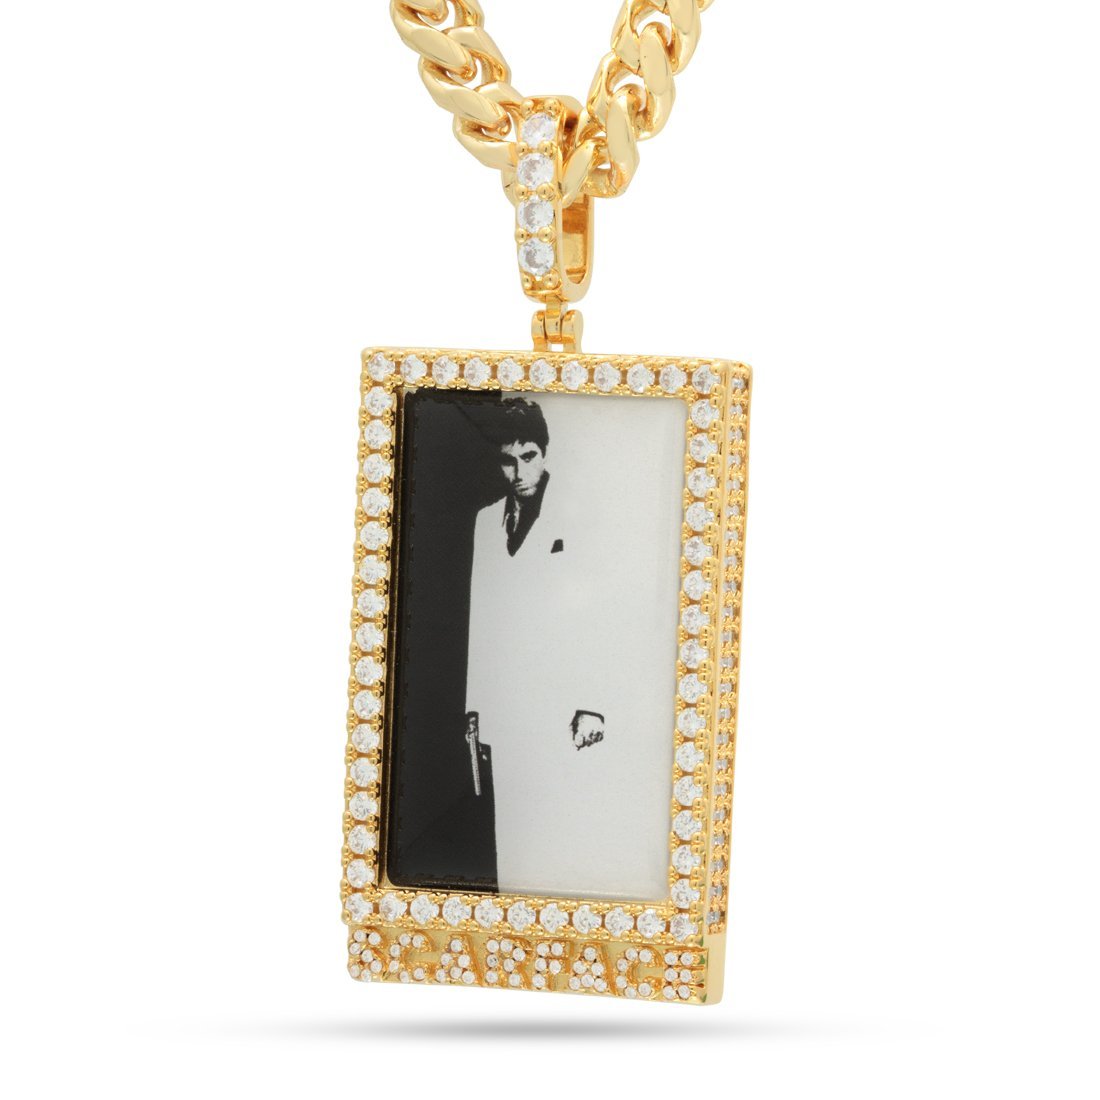 Drakesboutique - King Ice Jewelry